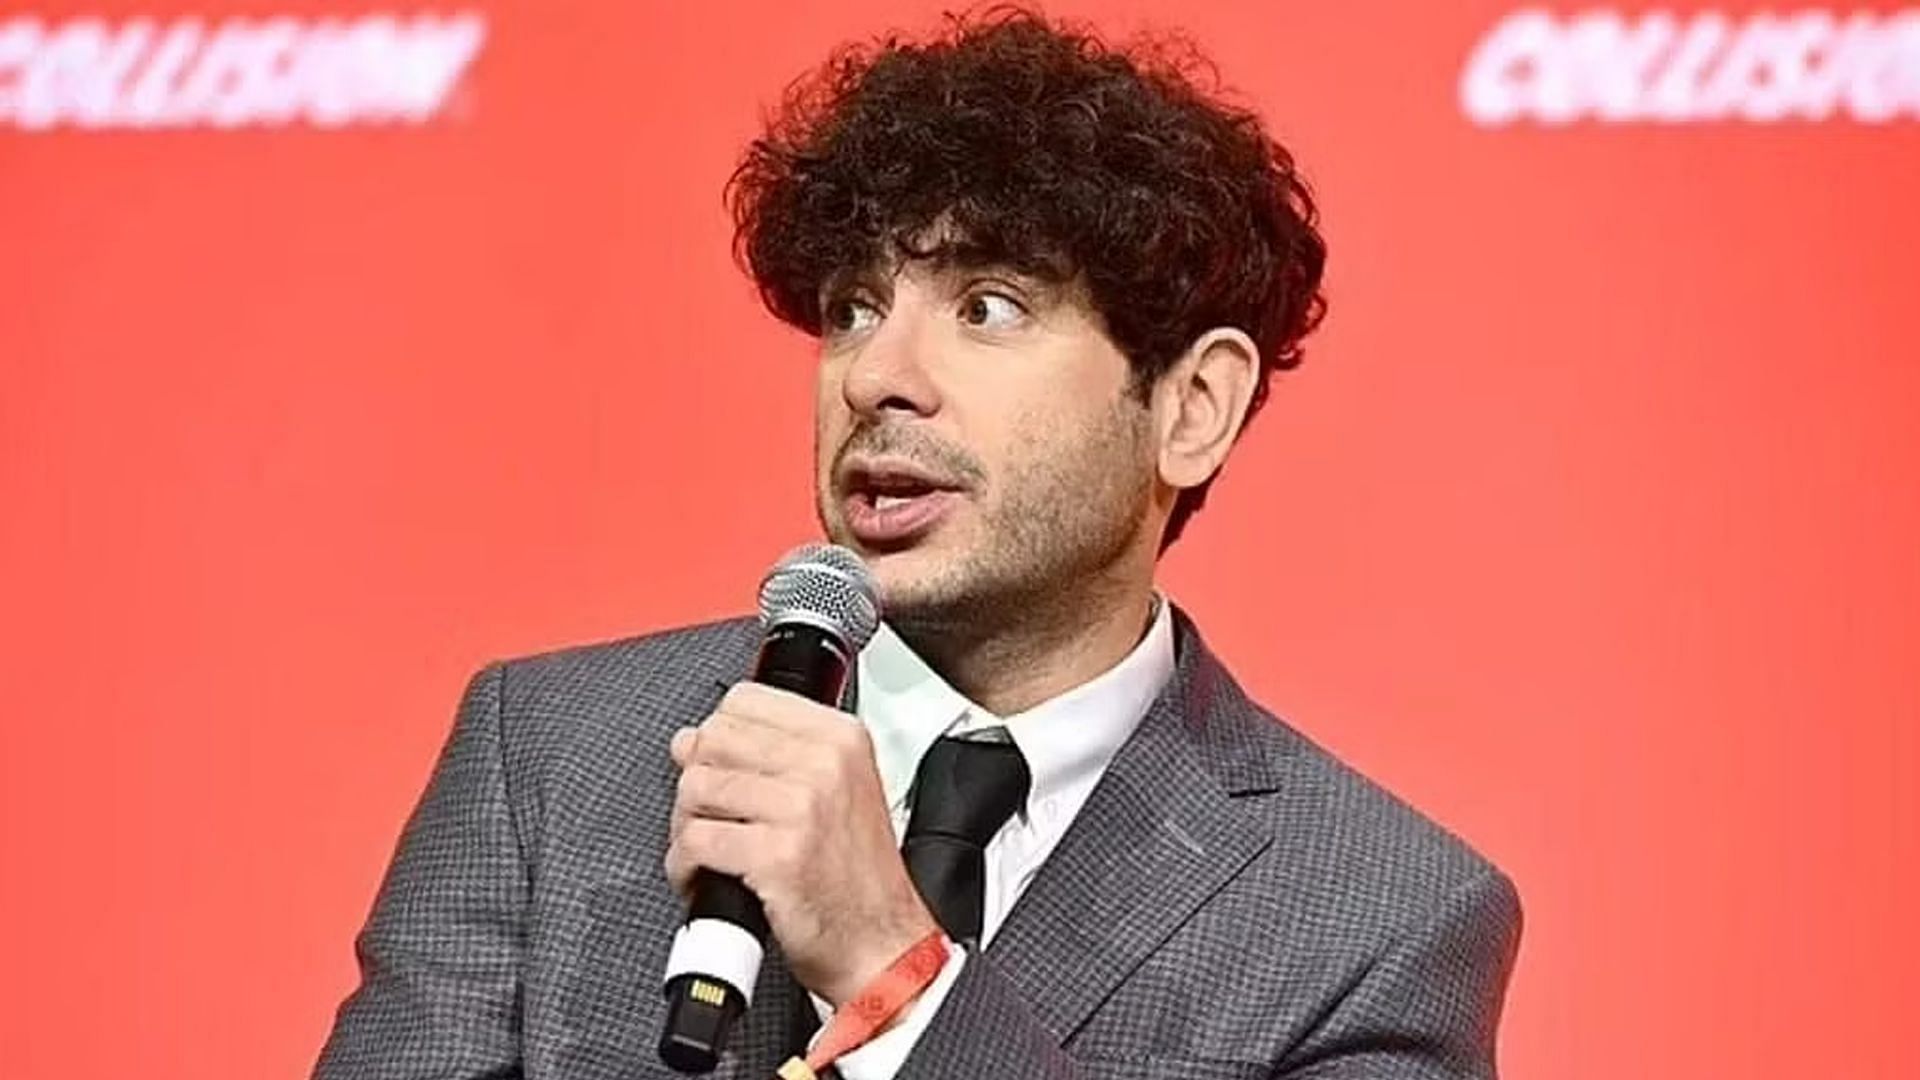 AEW President Tony Khan during one of the press interviews